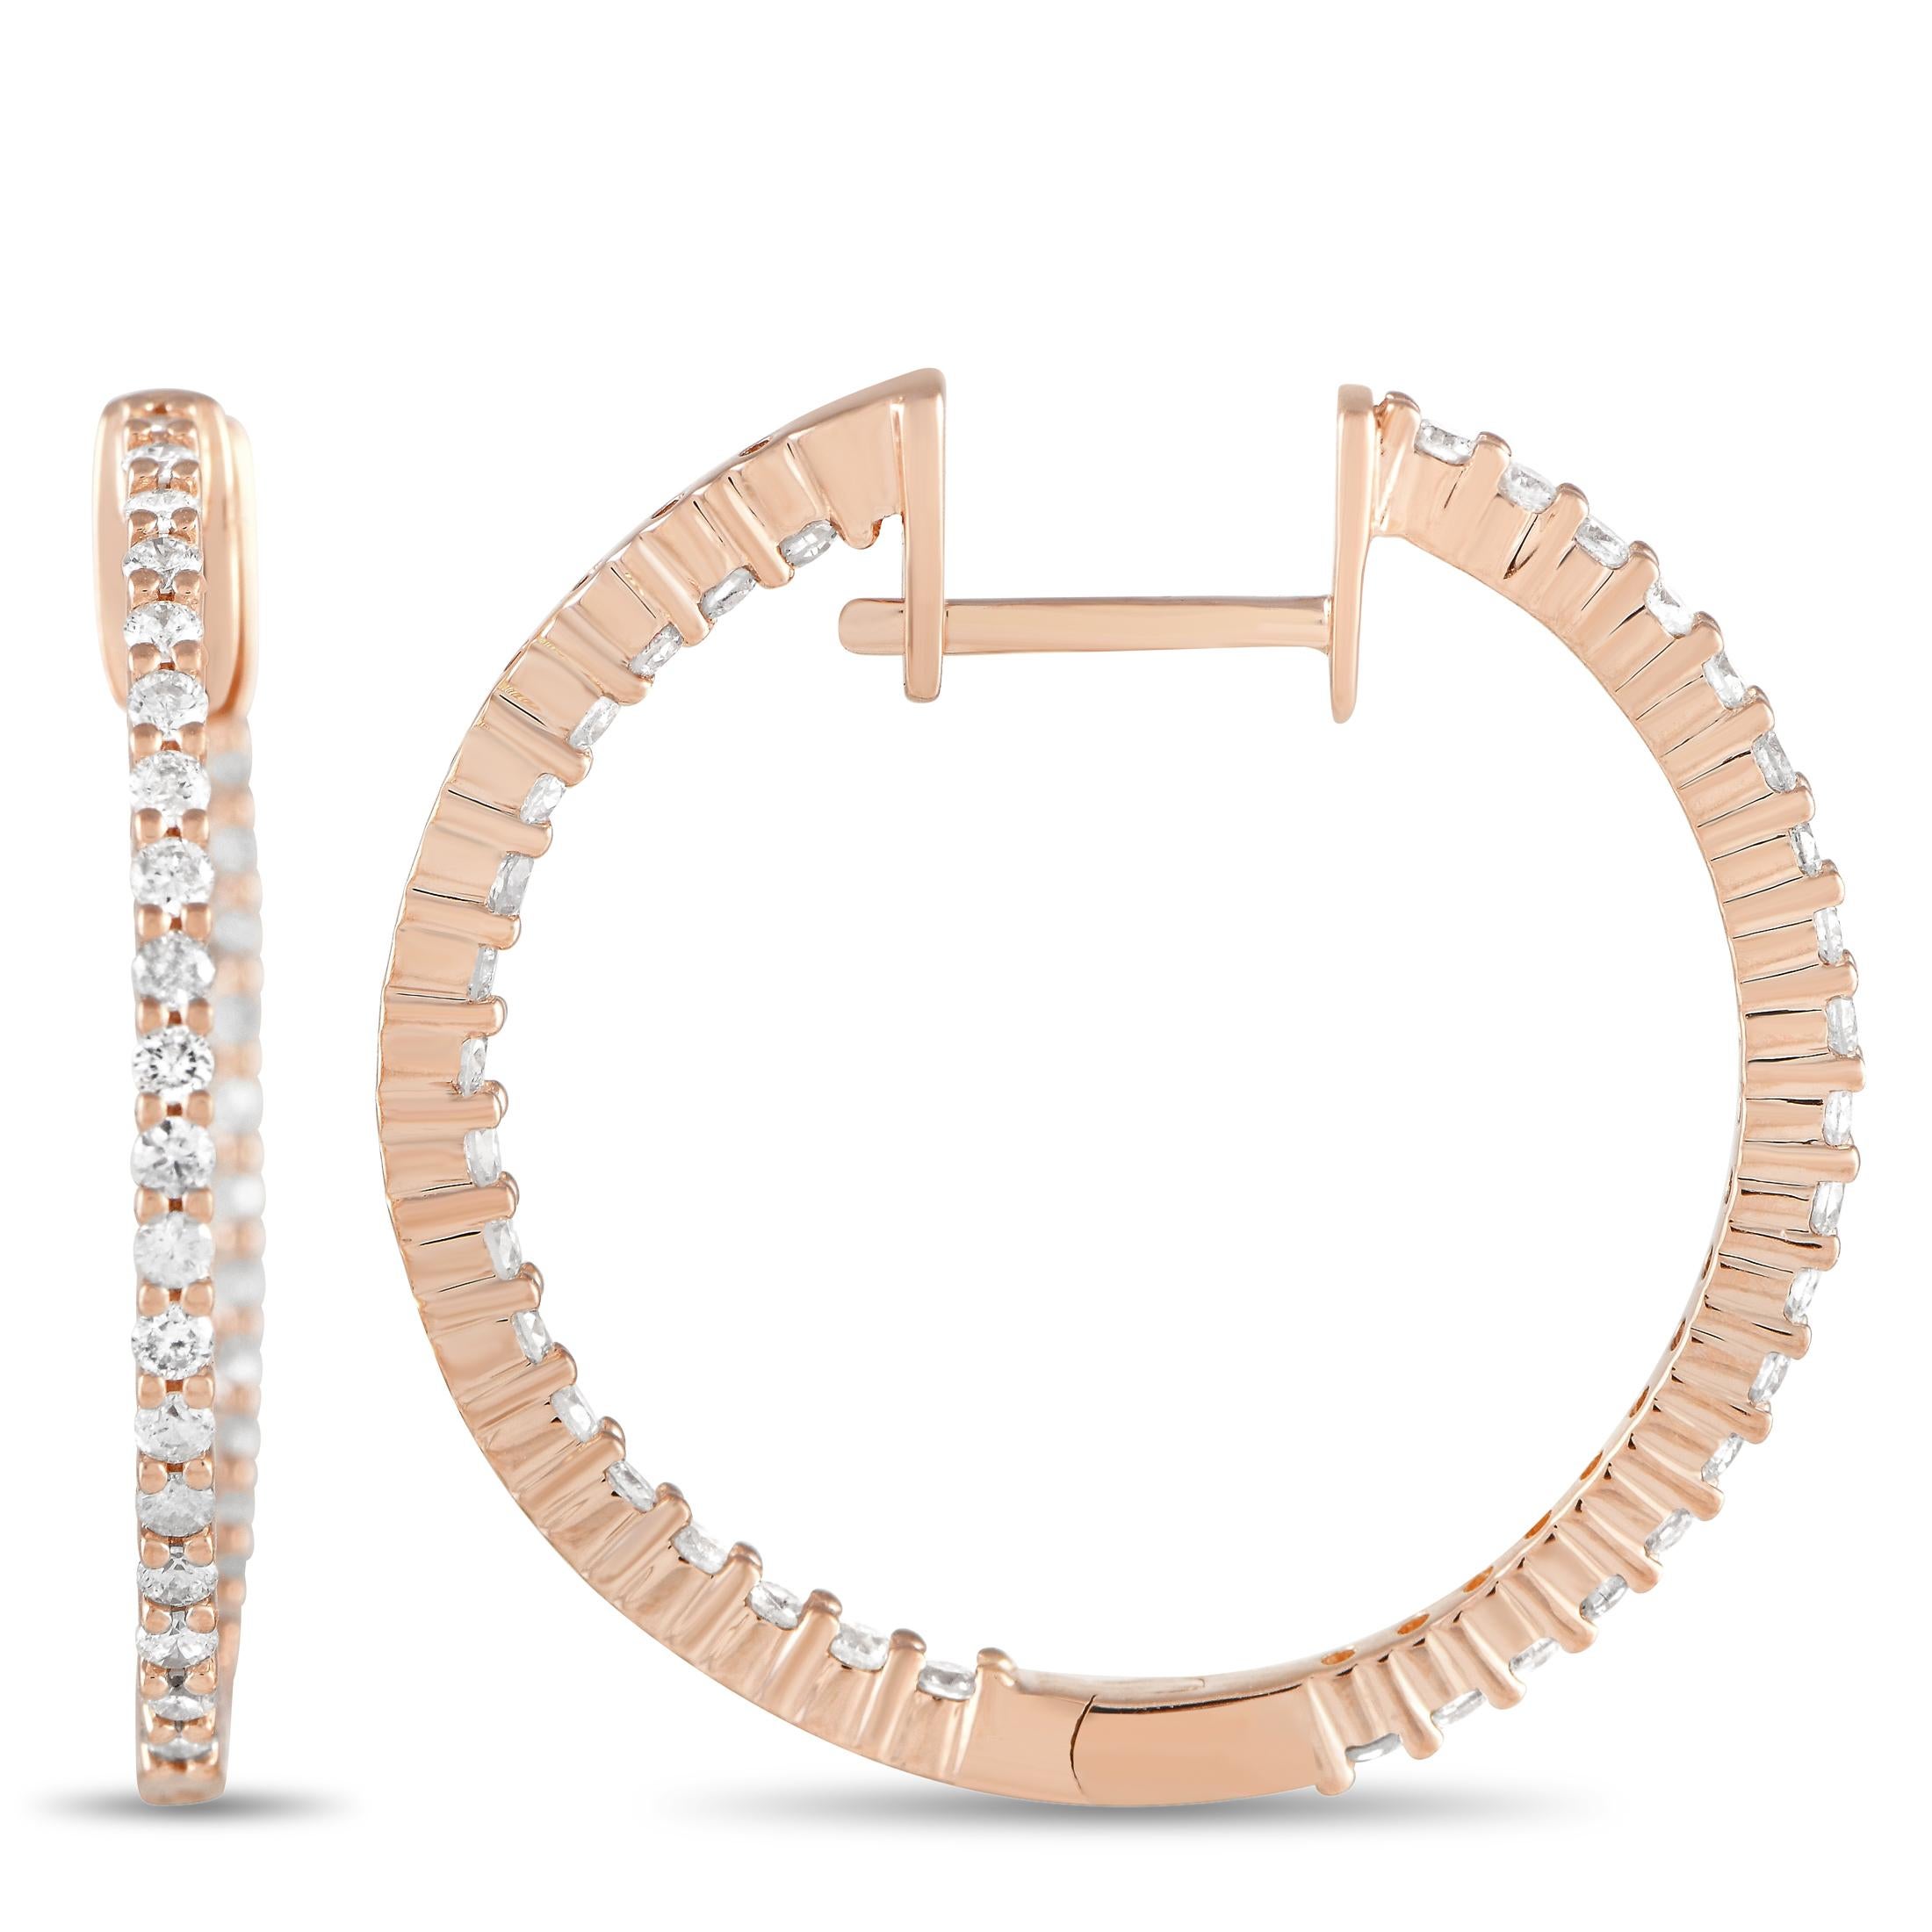 Feminine yet powerful, these rose gold diamond hoops make a versatile addition to your jewelry collection. Each hoop measures 1